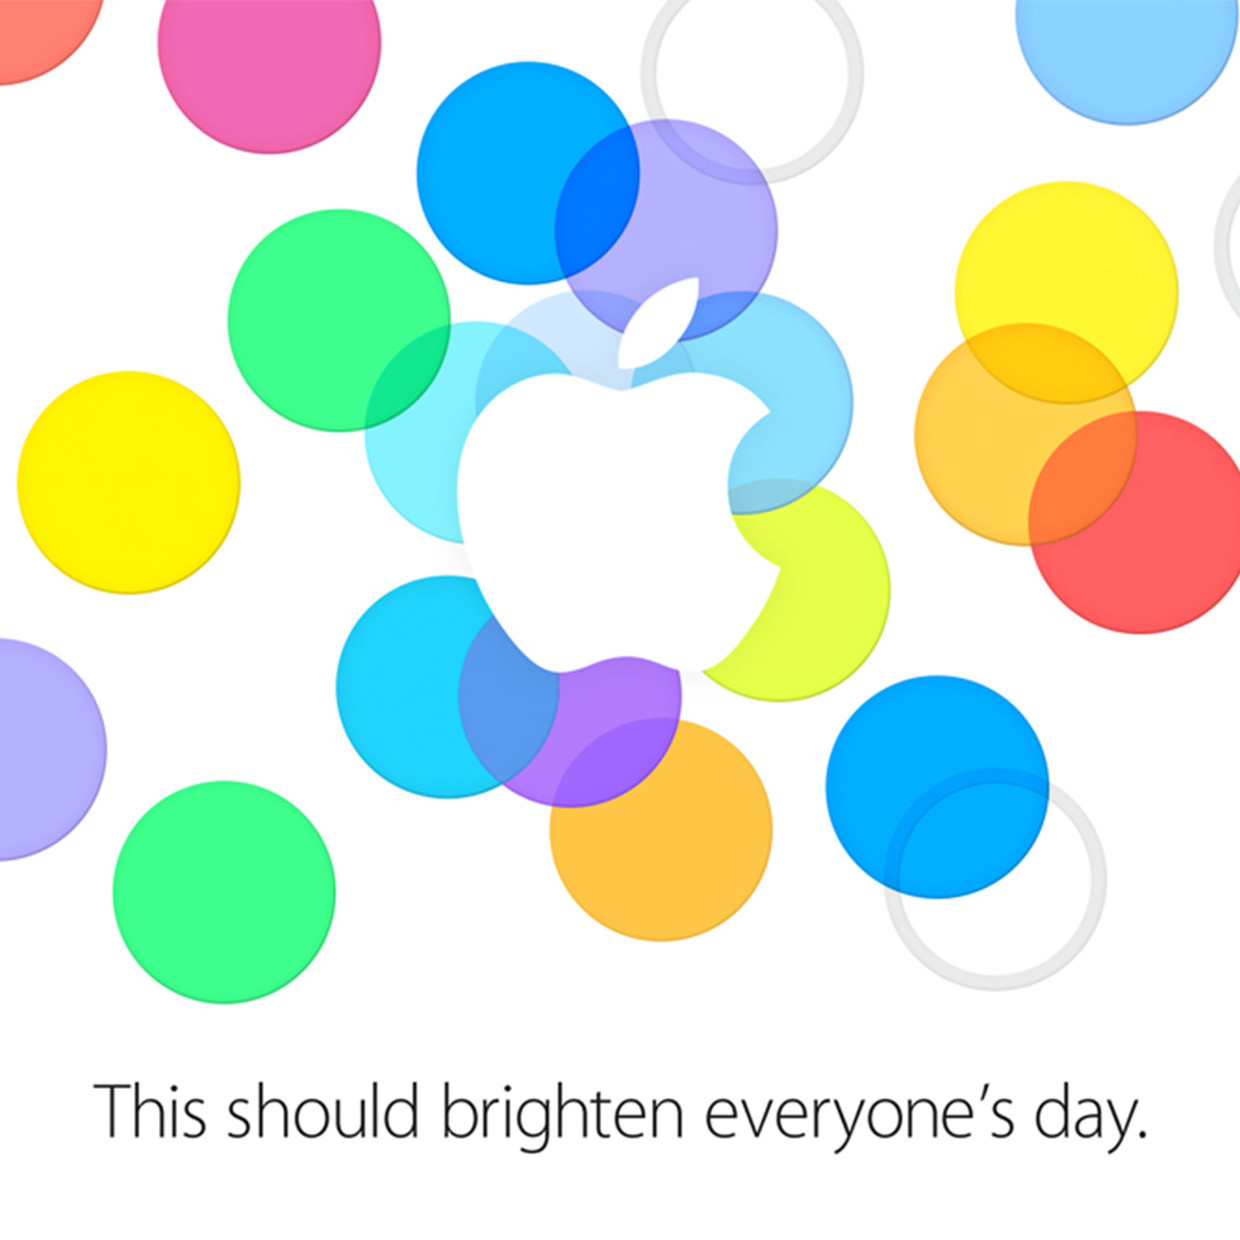 iphone_event_brightens_day_wallpaper_ipad